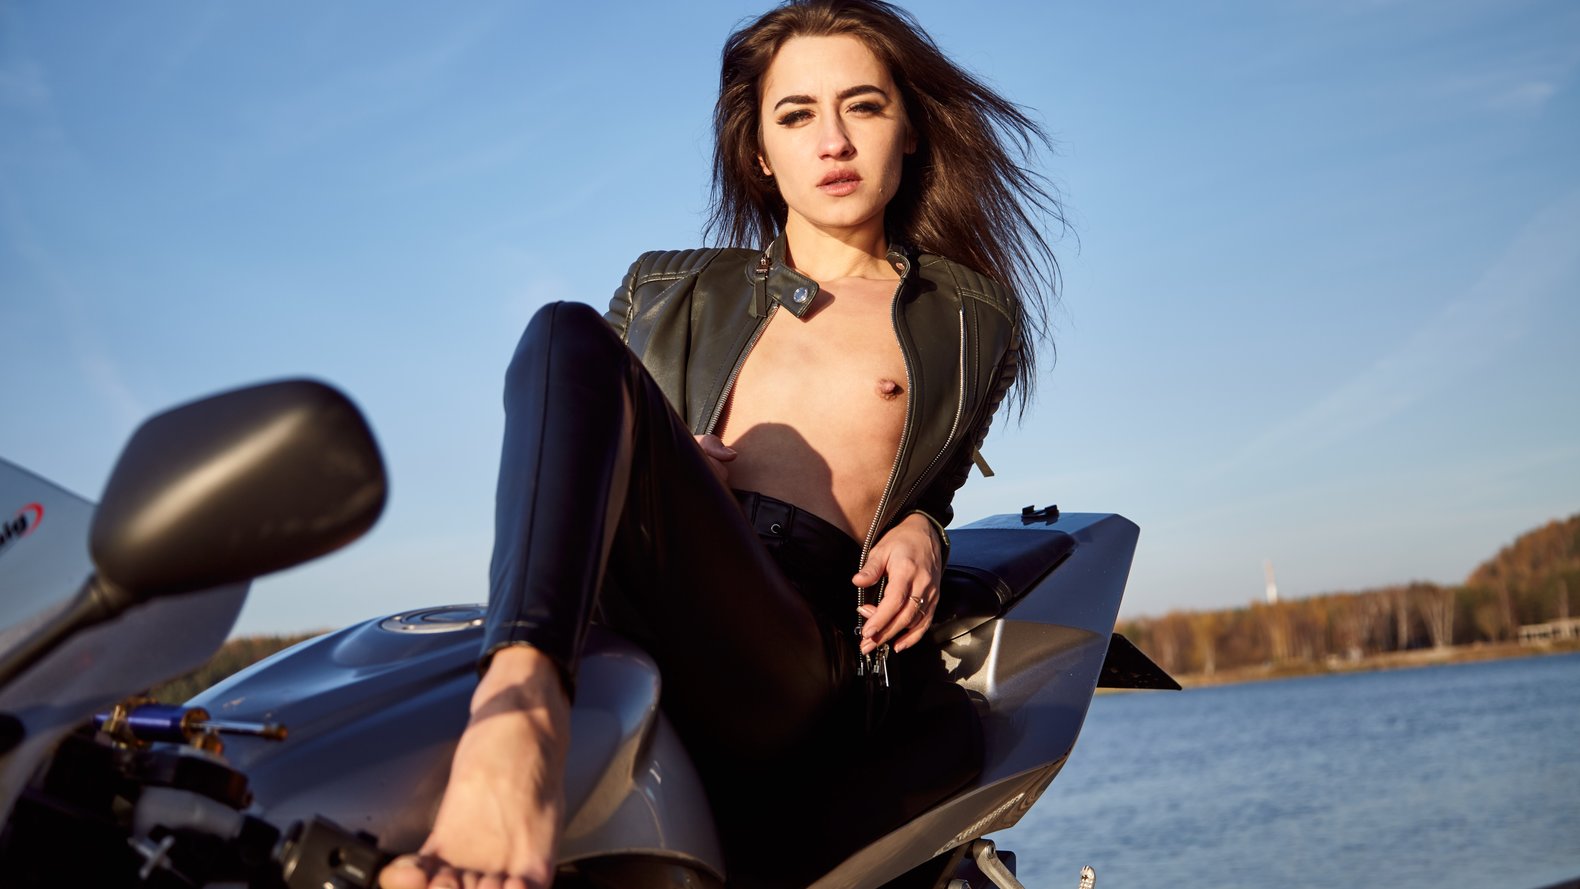 Young woman with small tits topless leather jacket under